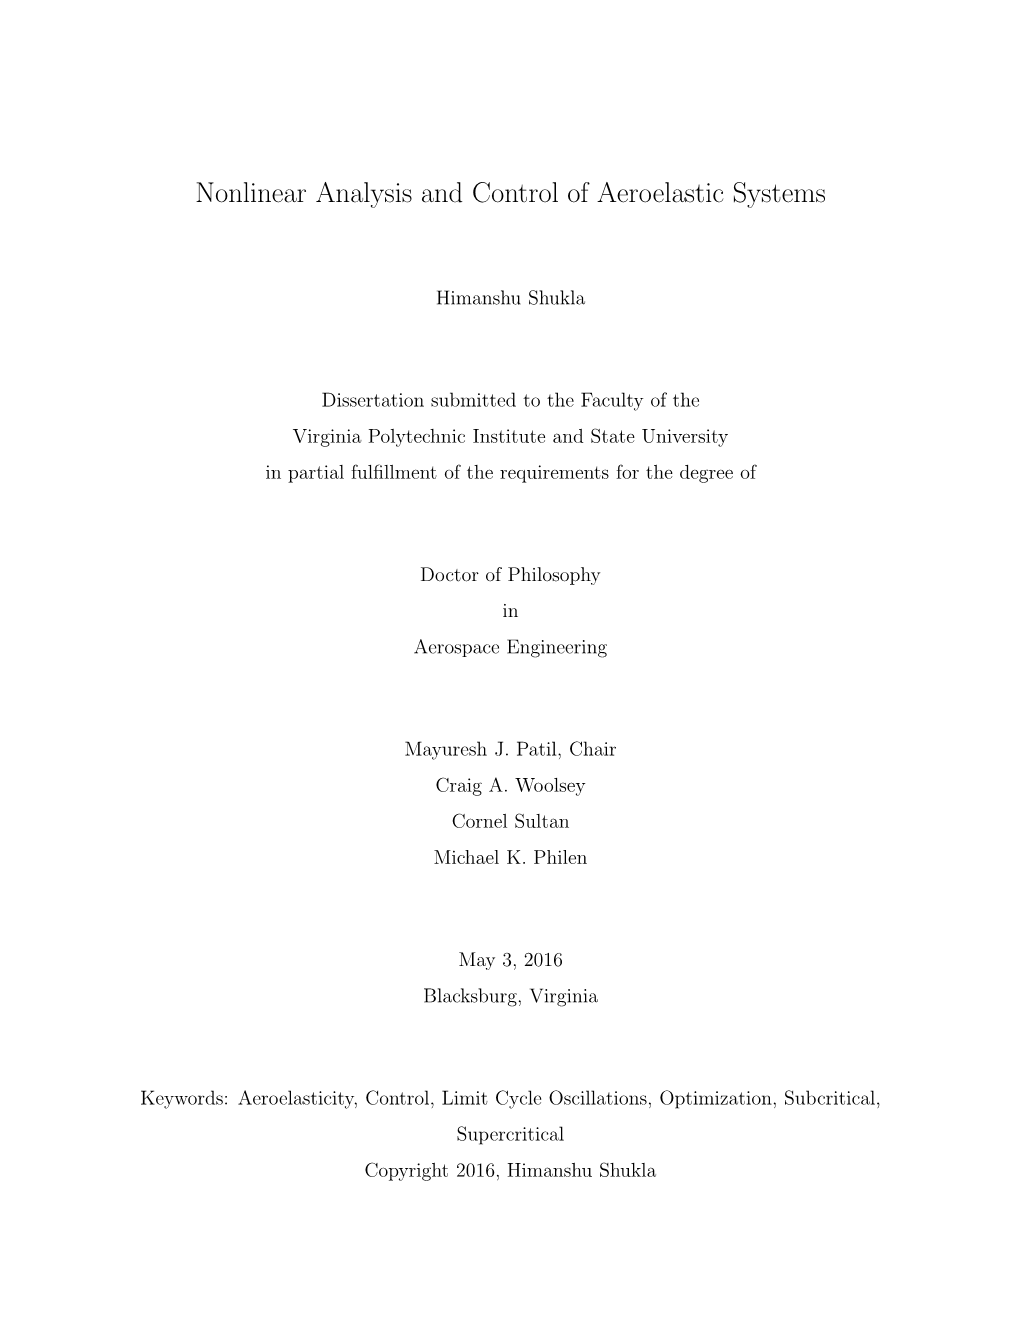 Nonlinear Analysis and Control of Aeroelastic Systems